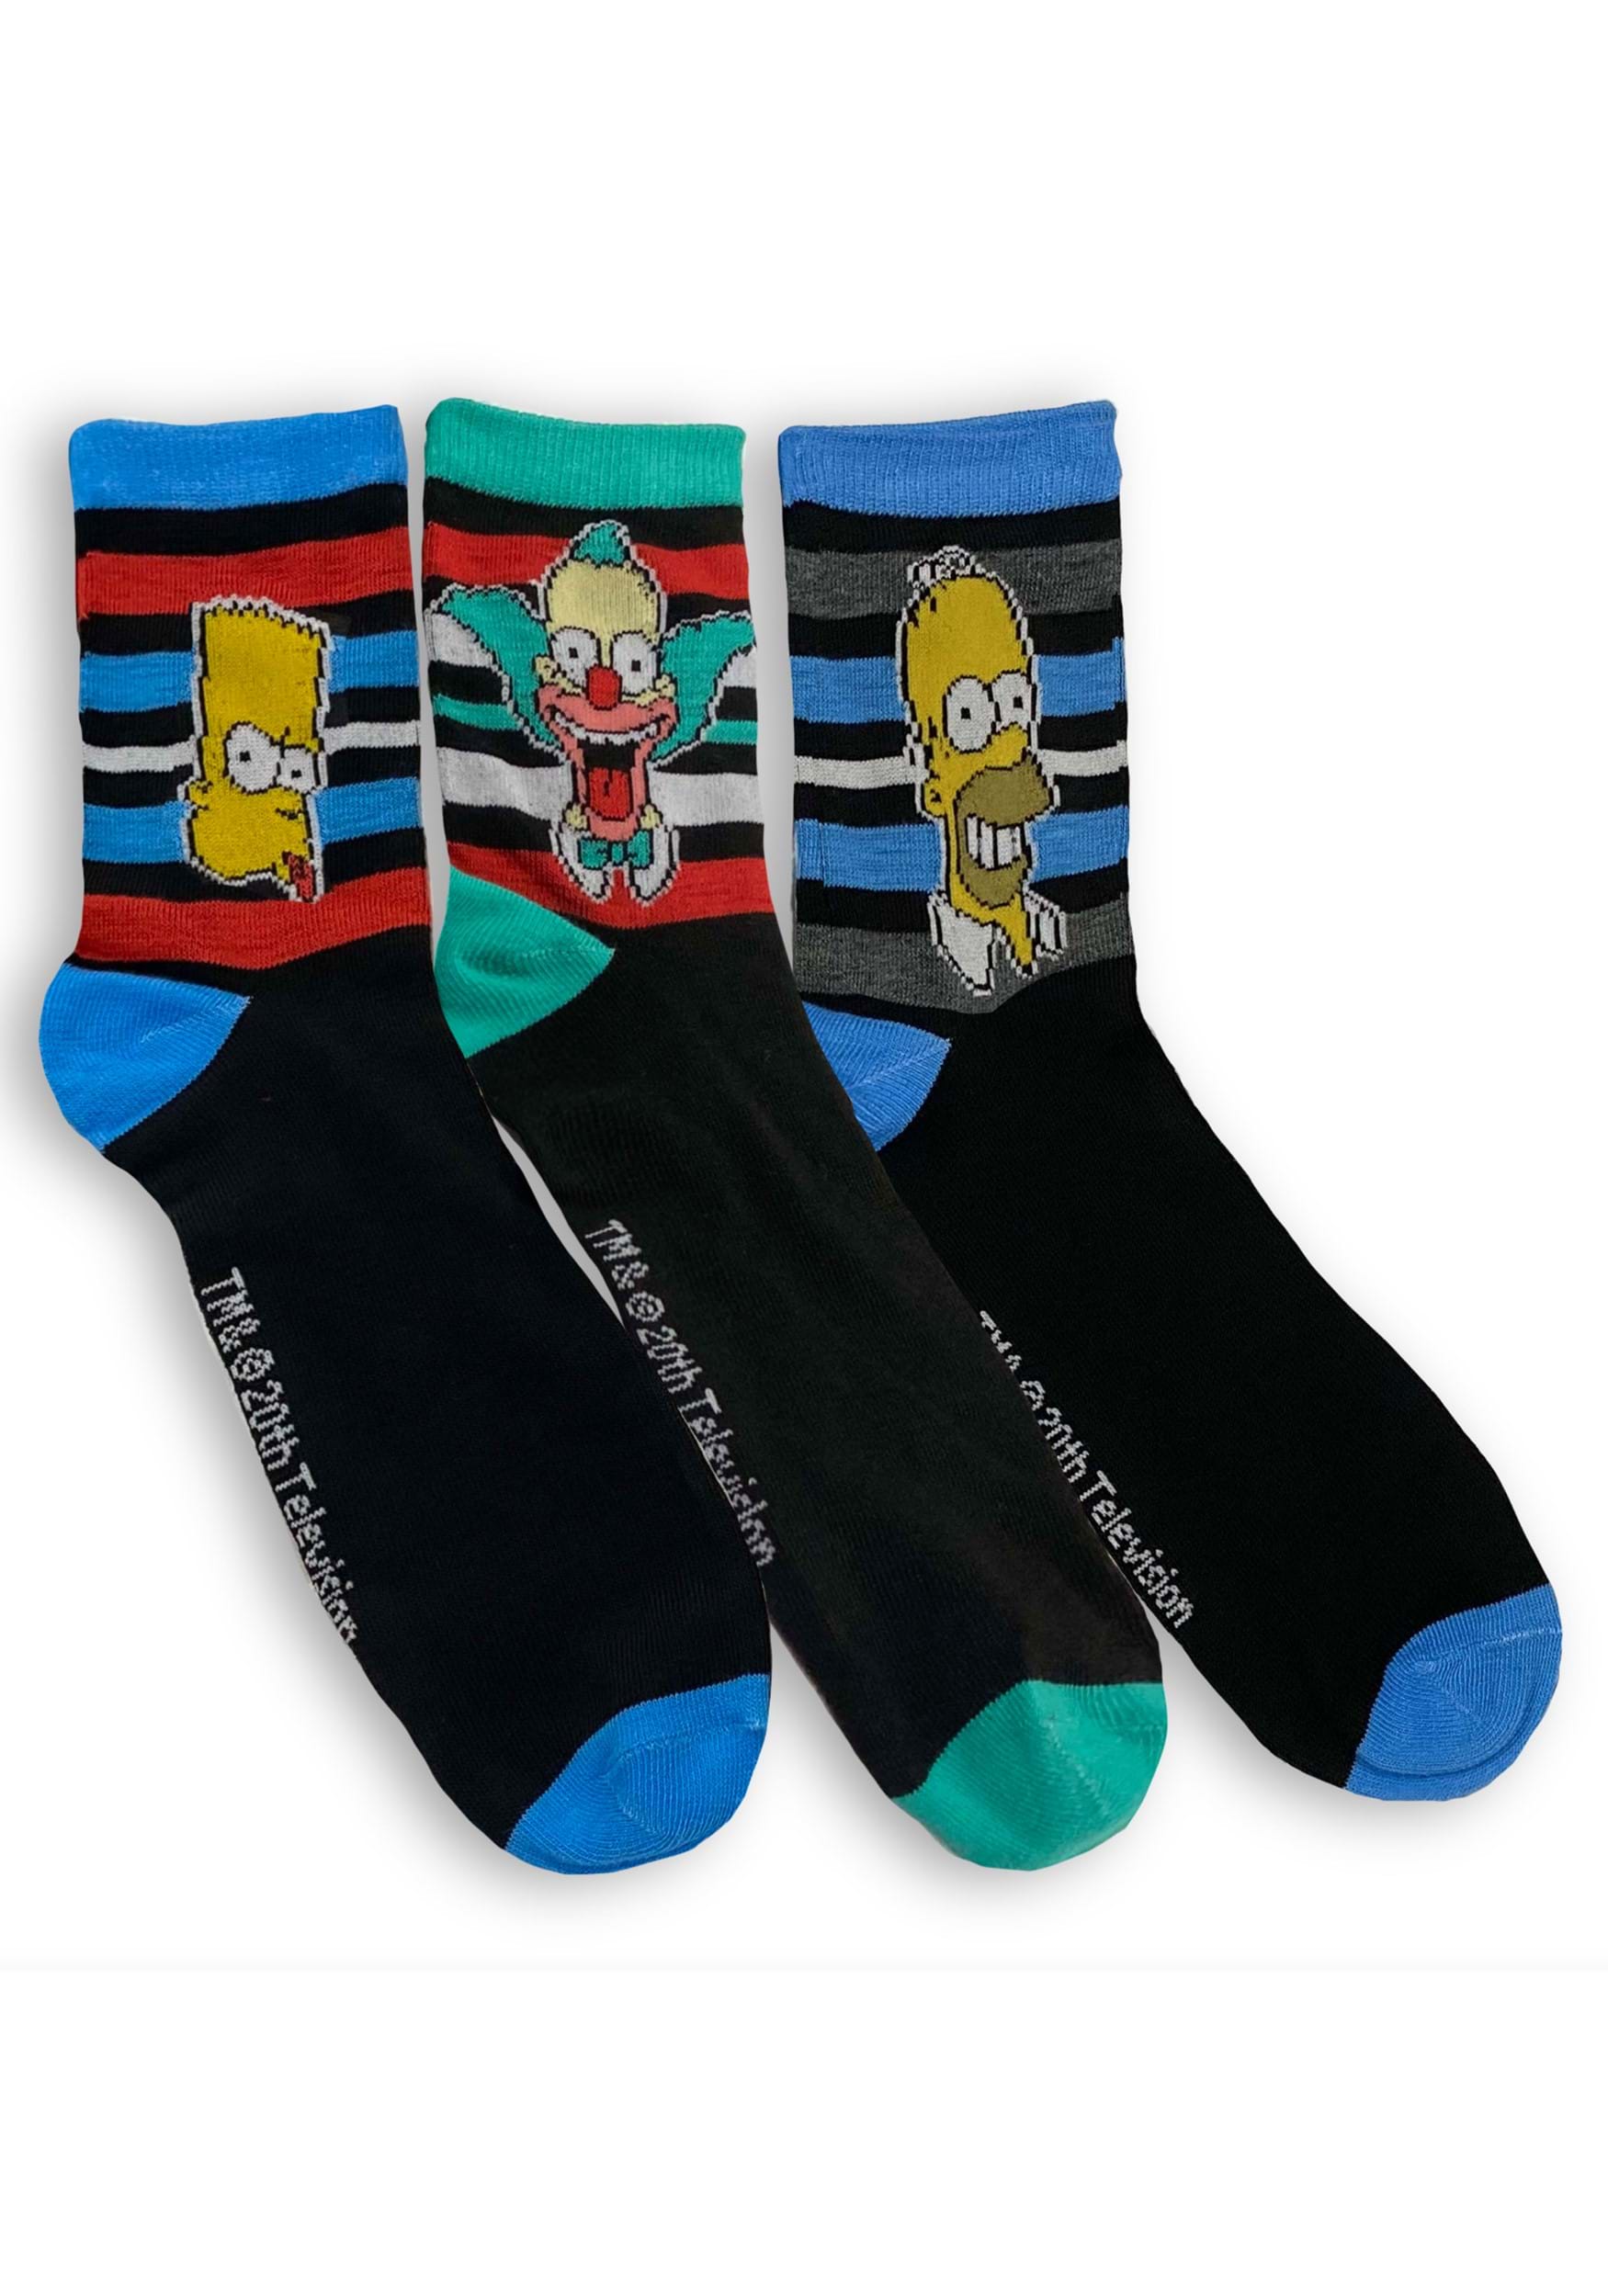 Adult 3 Pair of The Simpsons Striped Socks